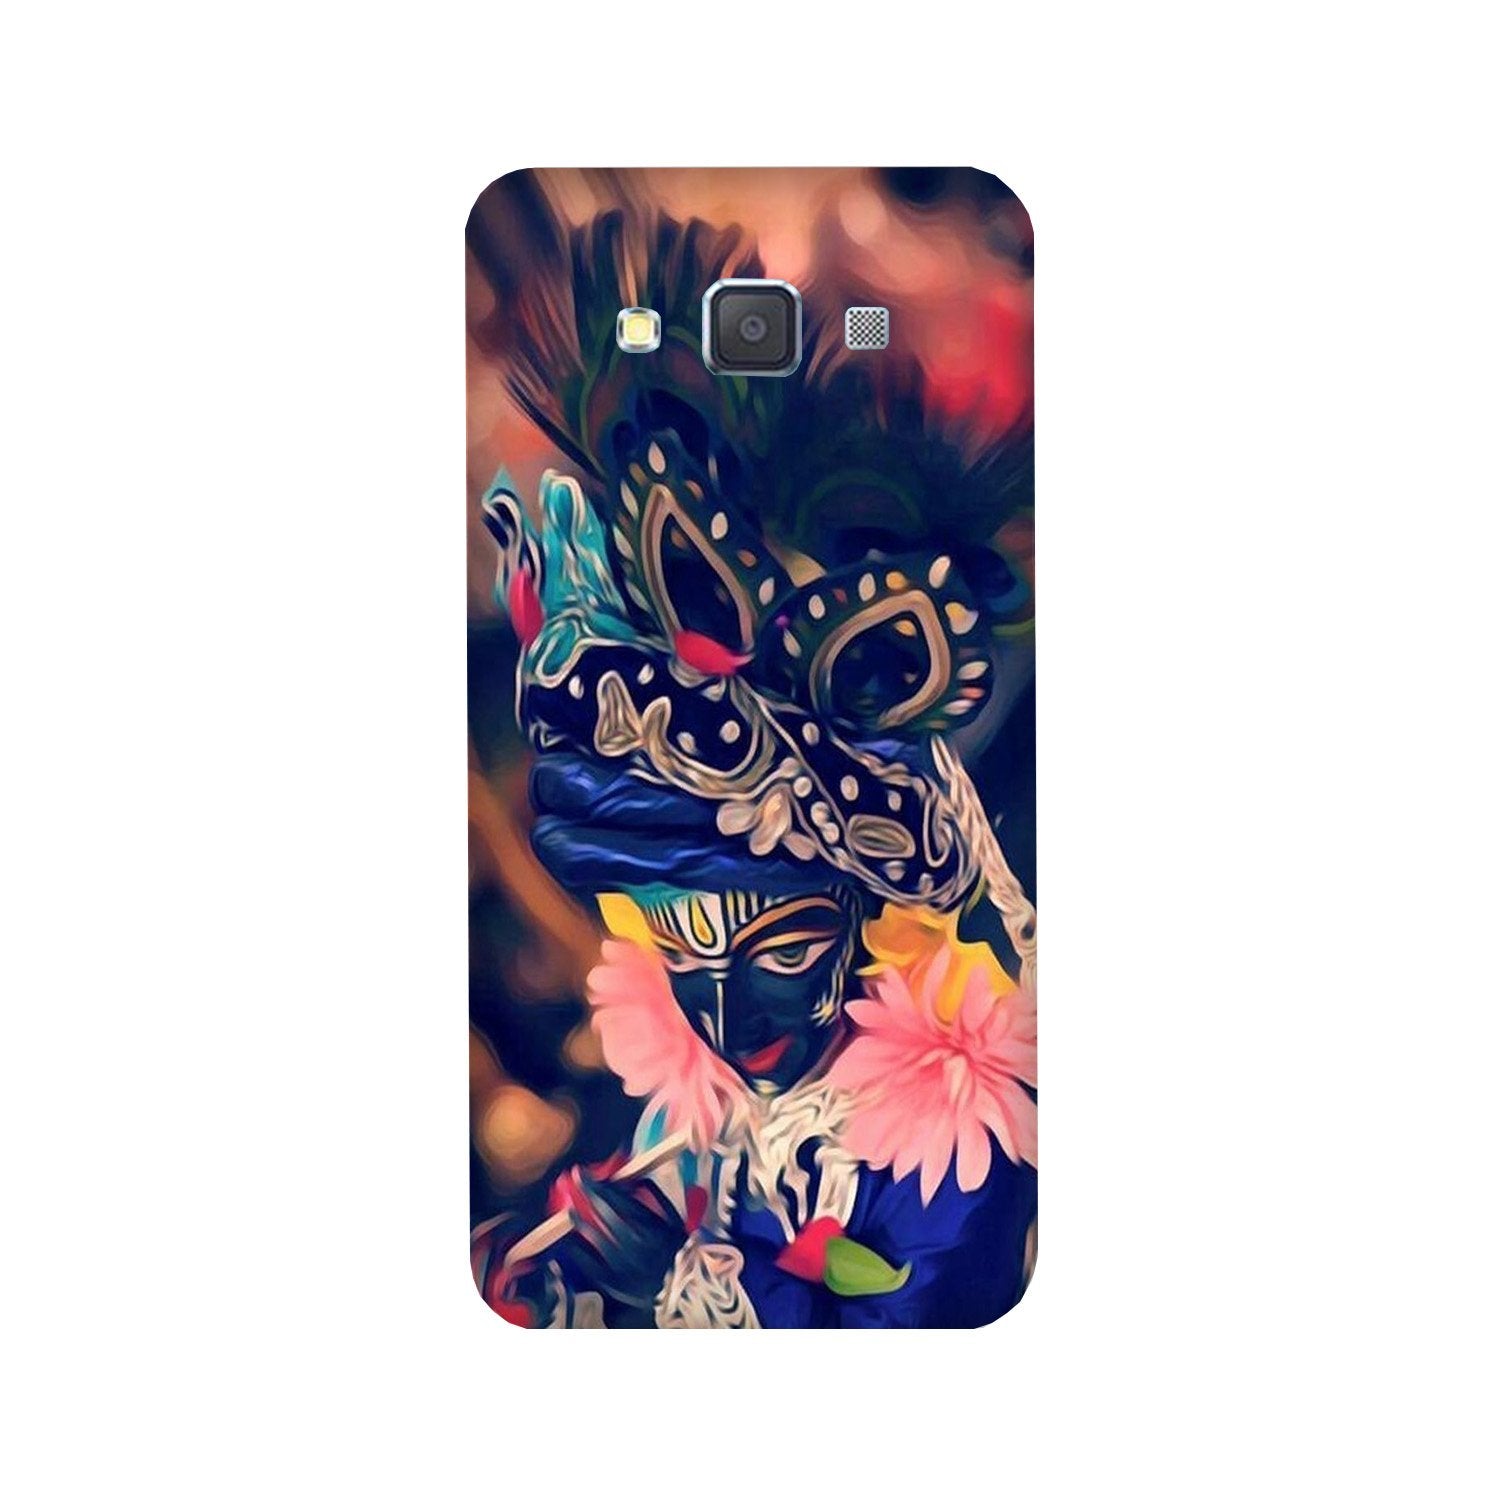 Lord Krishna Case for Galaxy ON5/ON5 Pro